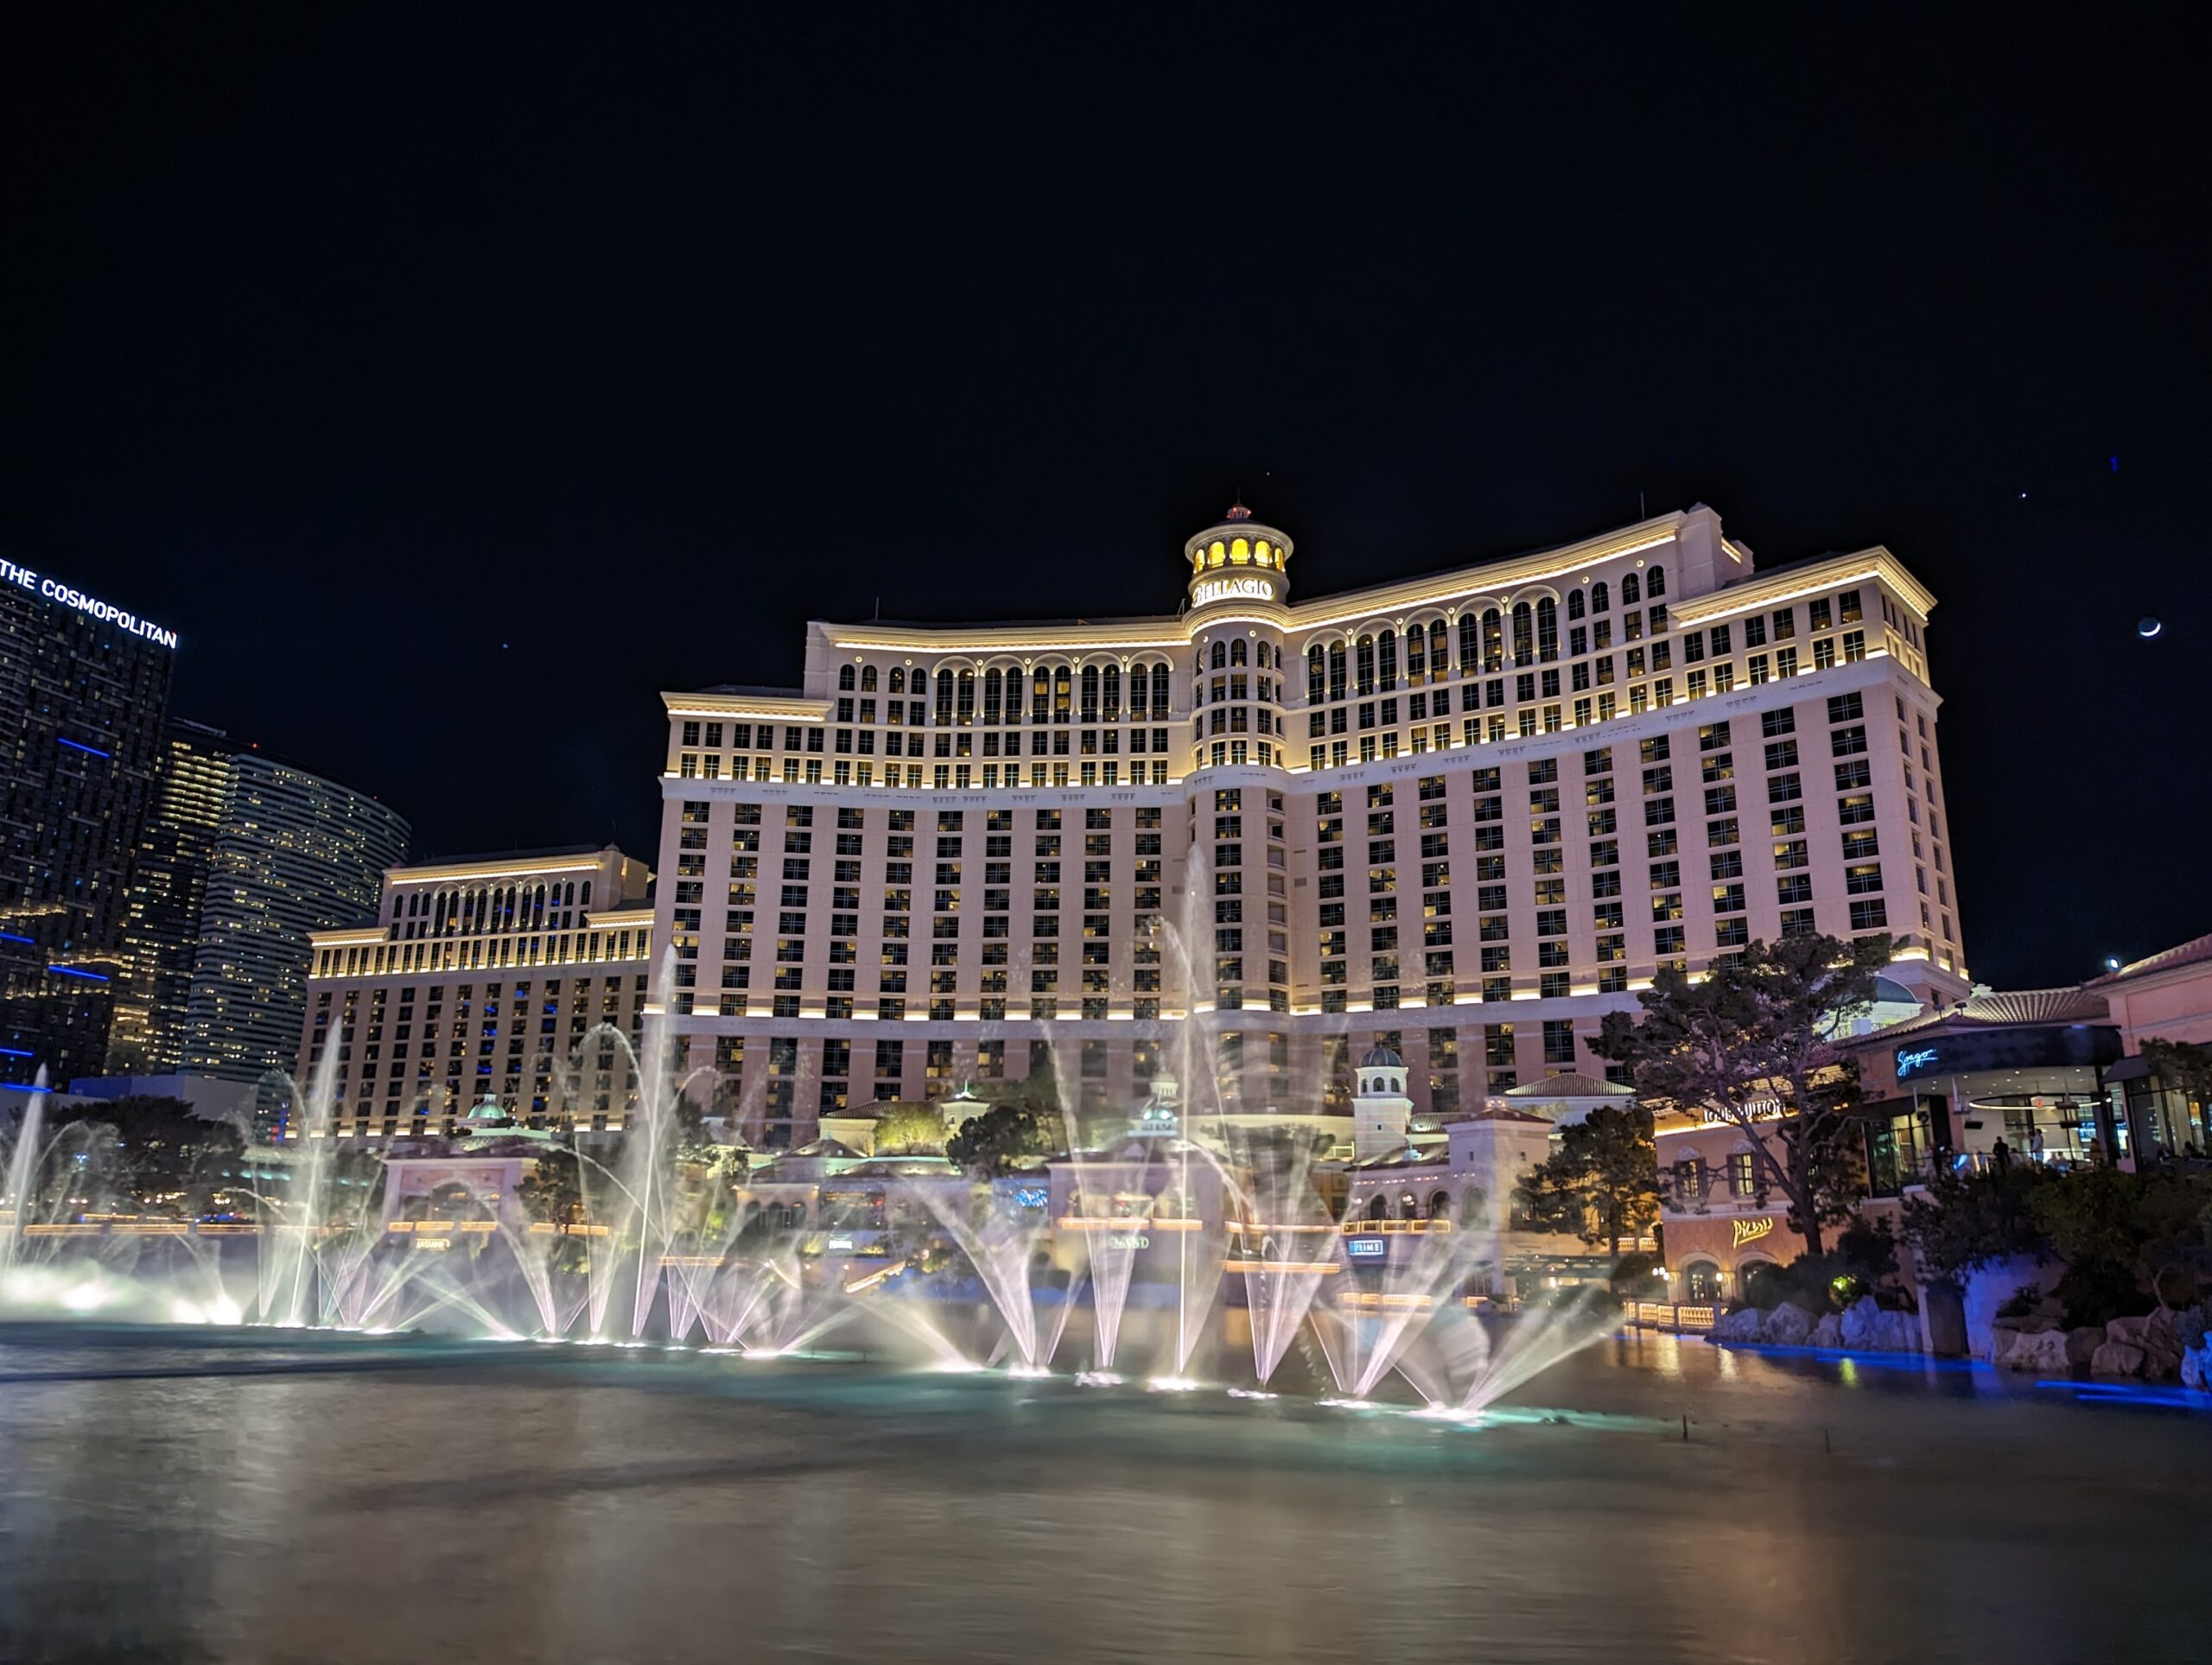 a water fountains in front of a large building with Bellagio in the background